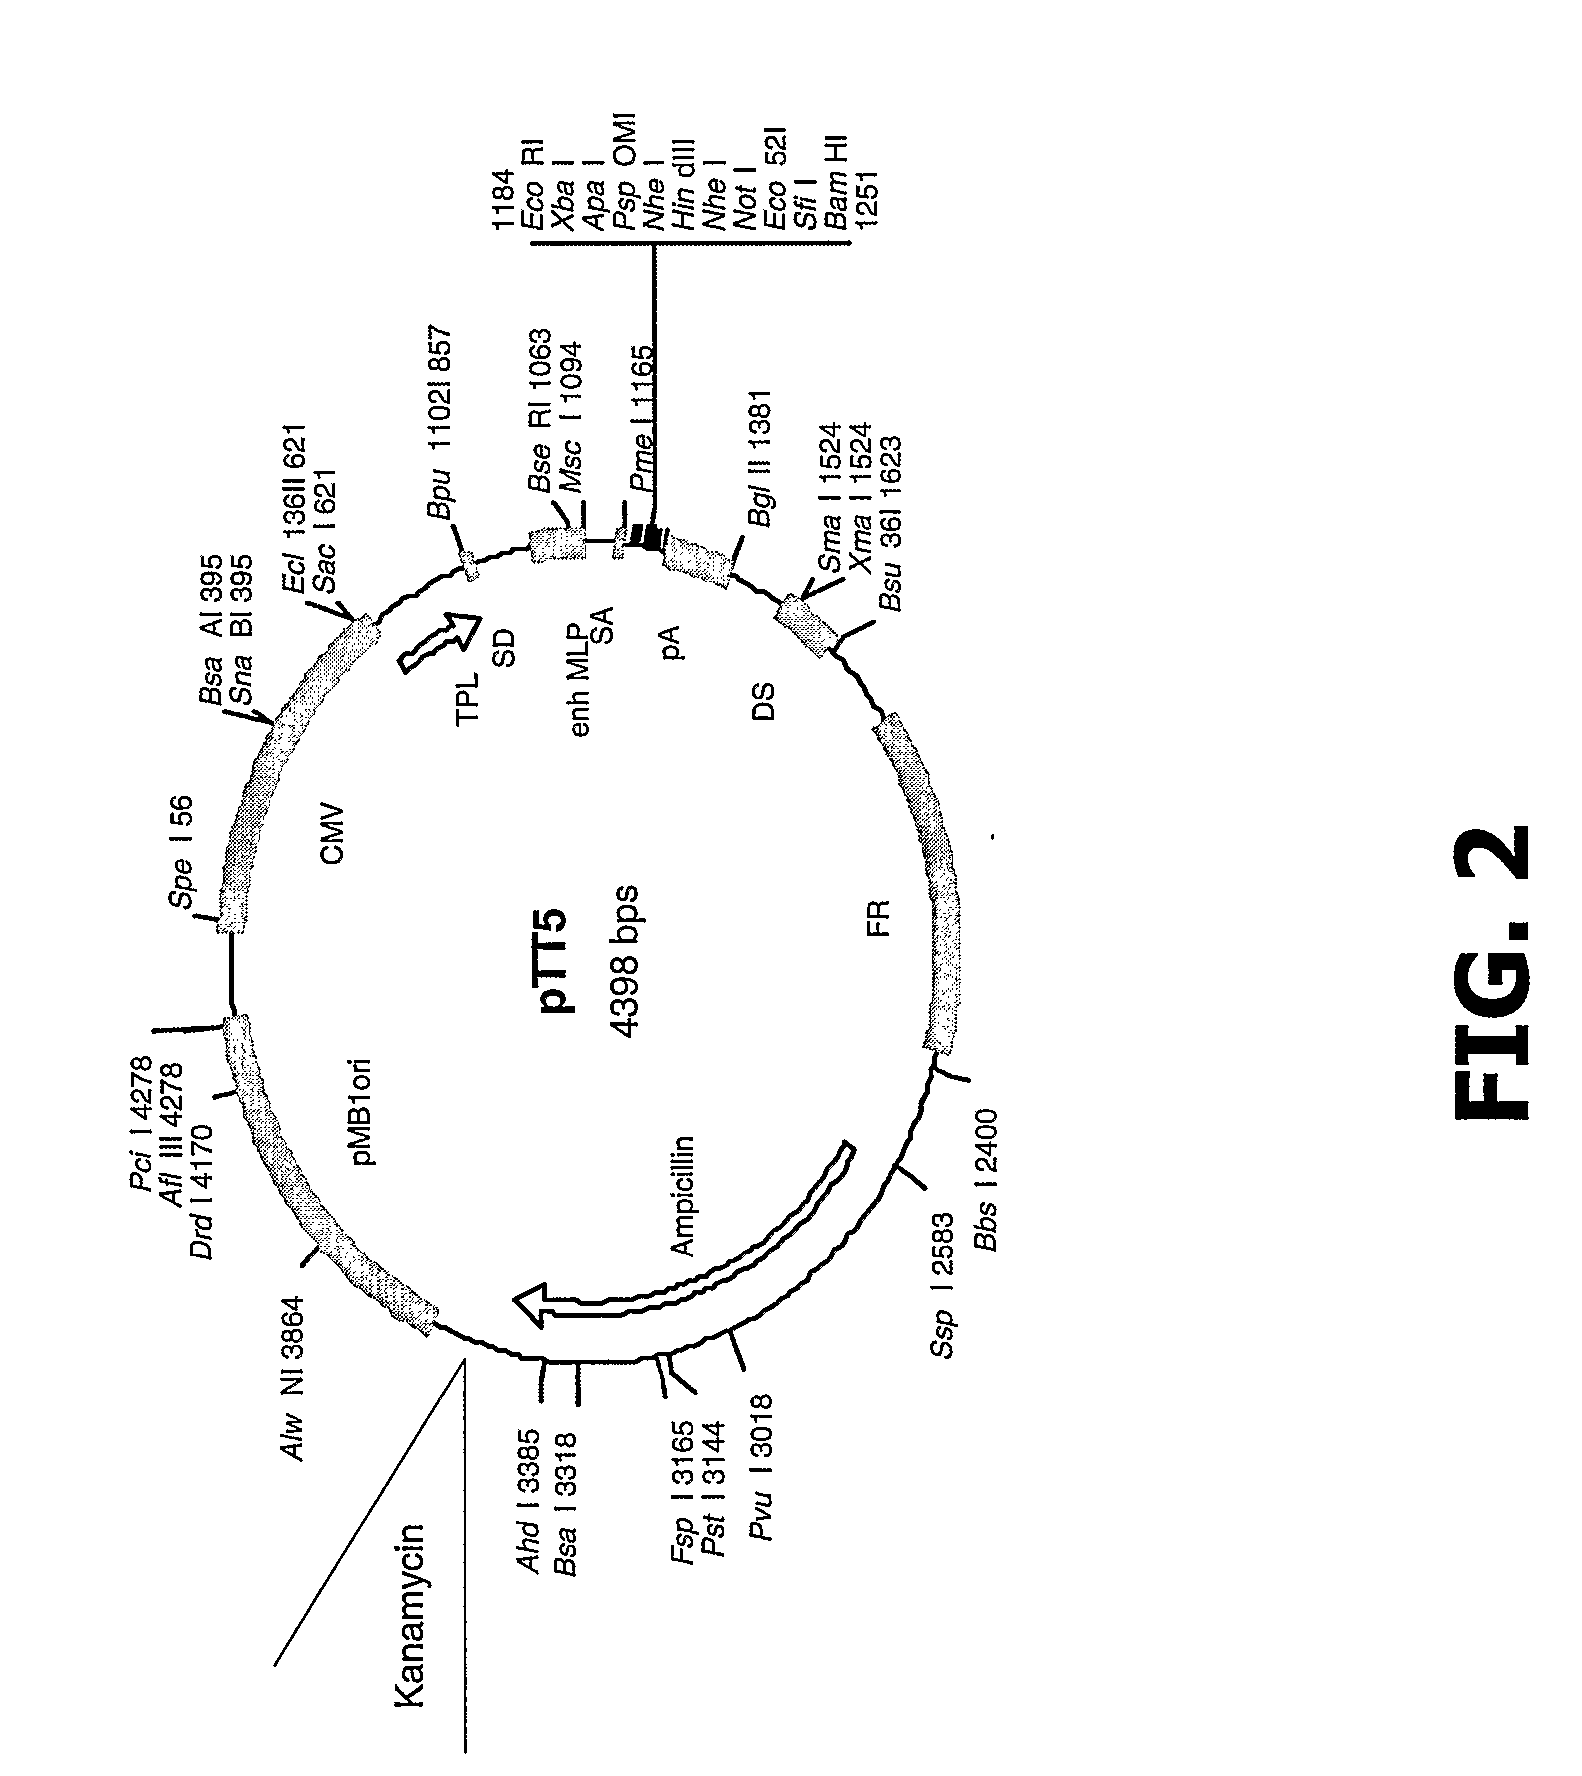 Compositions and Methods of Use for Mgd-Csf in Disease Treatment